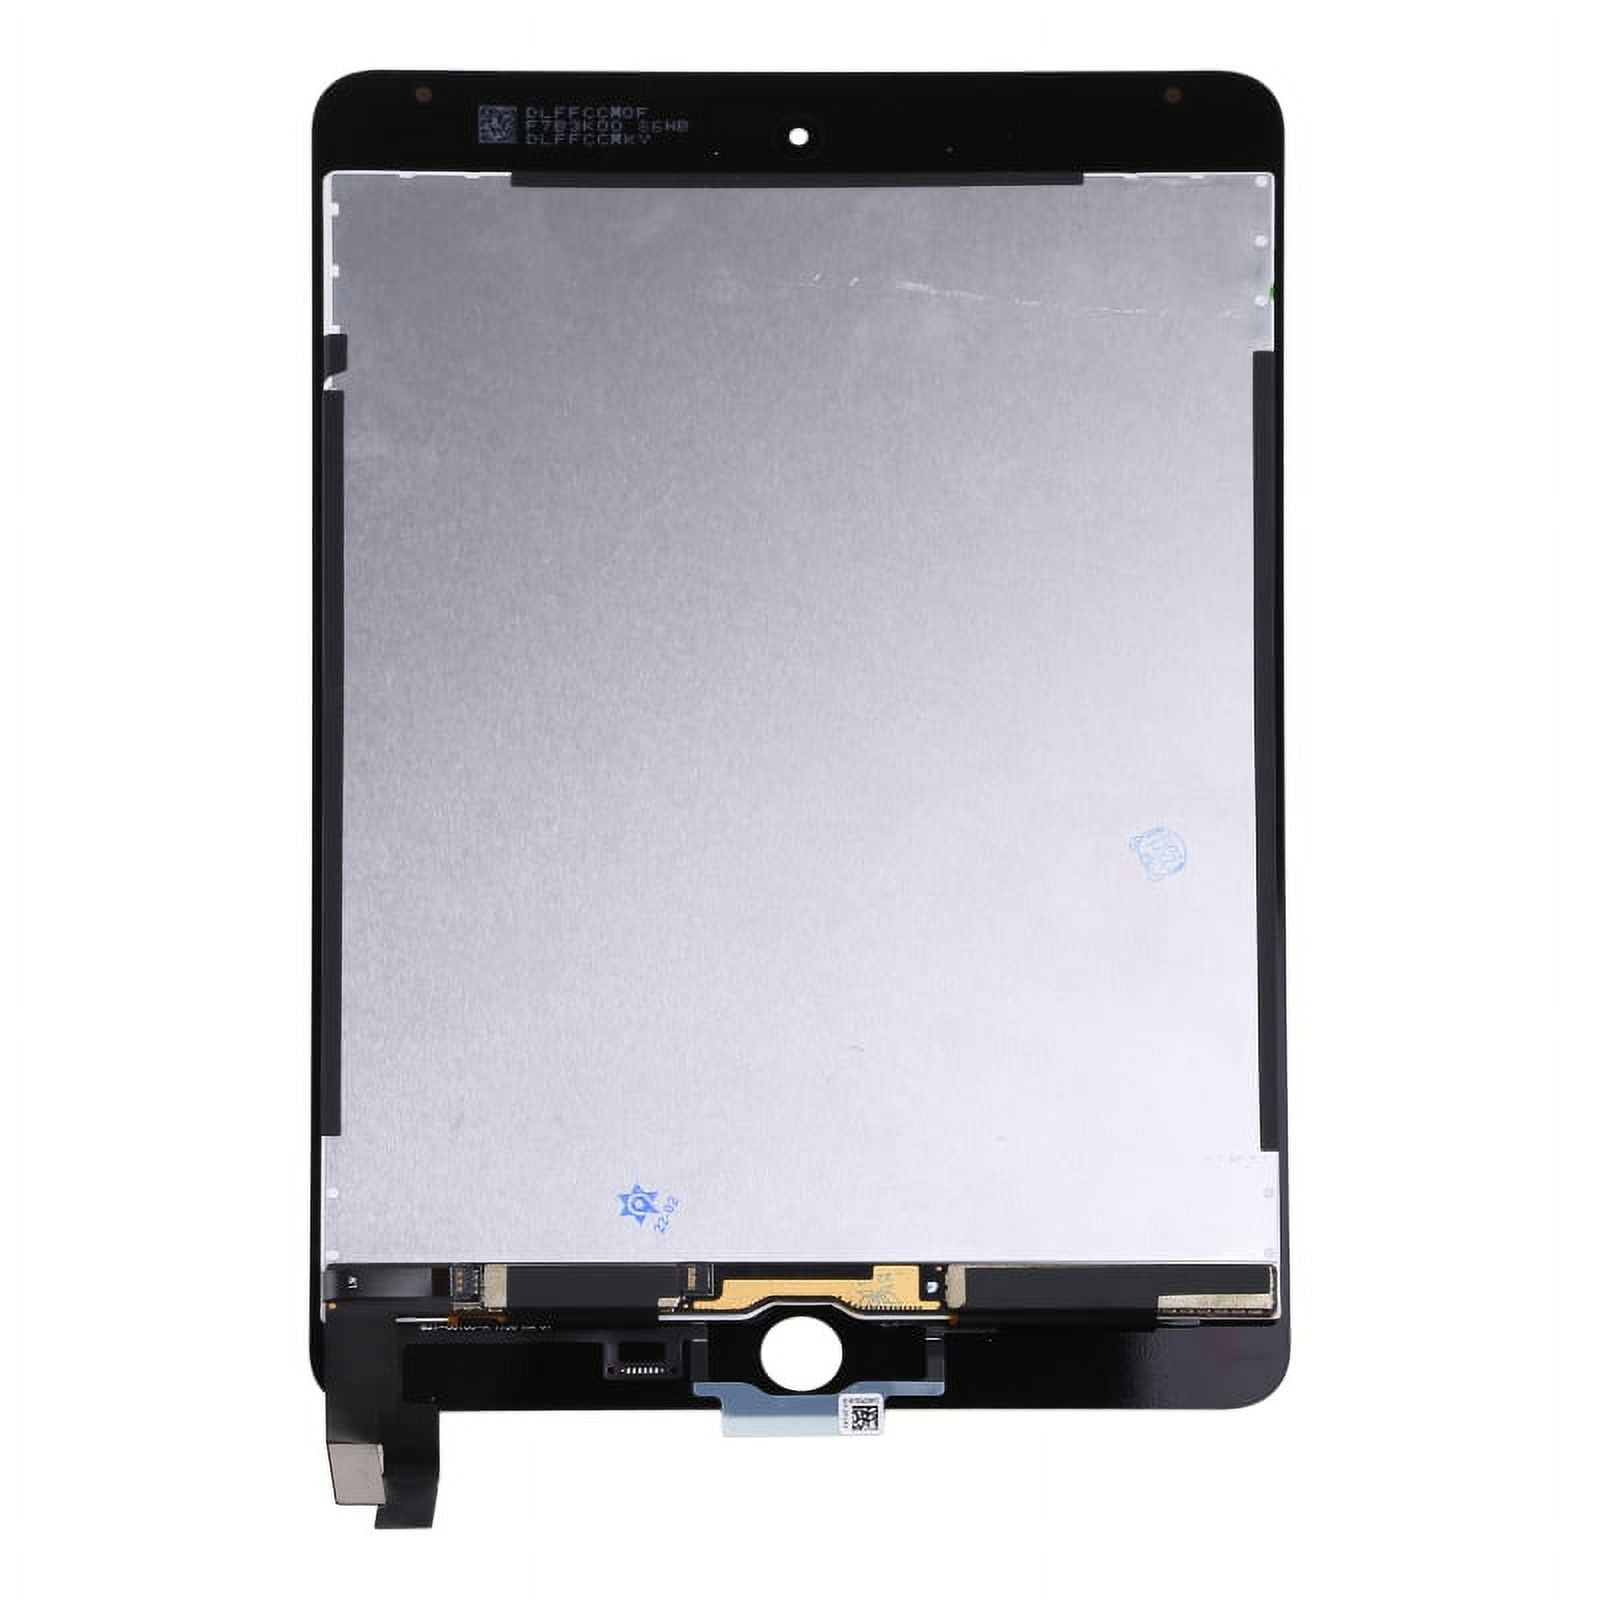  ANWARKA LCD Display Touch Screen Digitizer Assembly for IPad  Mini 4 A1538 A1550 7.9 Screen Replacement Parts, Without Home Button Front  Panel with Free Tool Set and Screen Protector (White) 